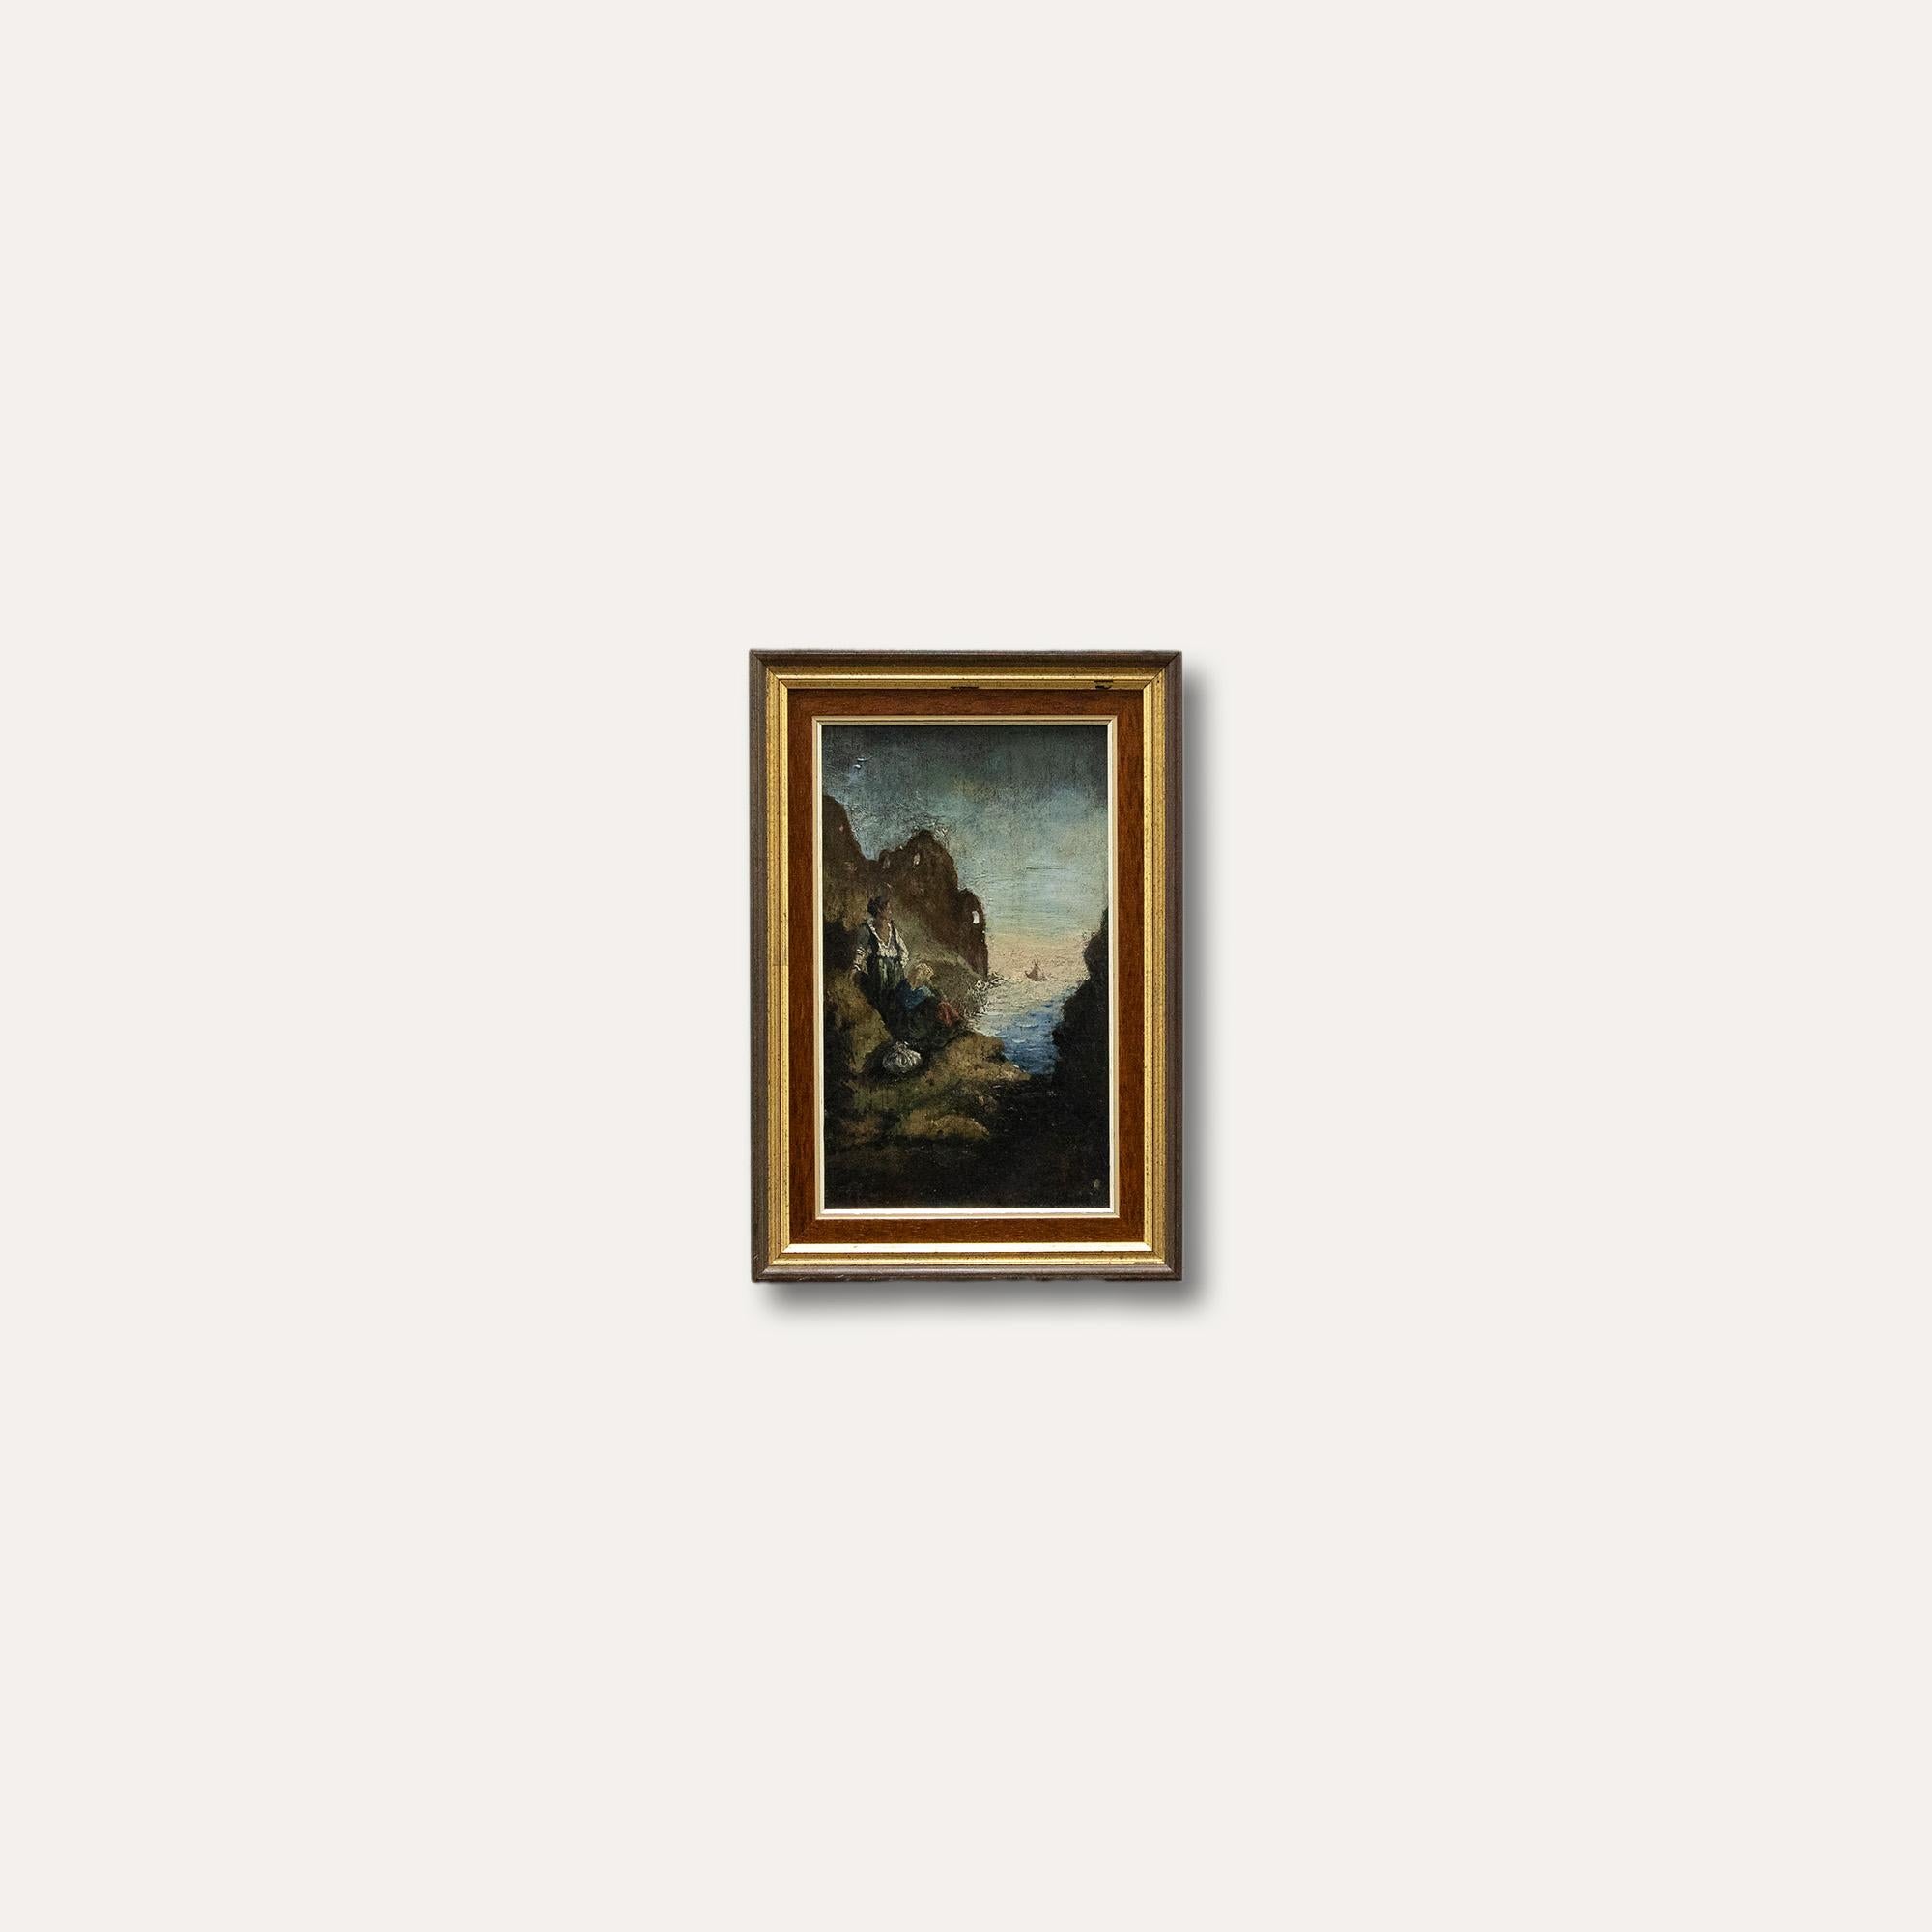 A charming 19th-century oil depicting two females figures watching a ship leave for sea. The oil has been presented in a delicate wooden frame. Unsigned. On panel.